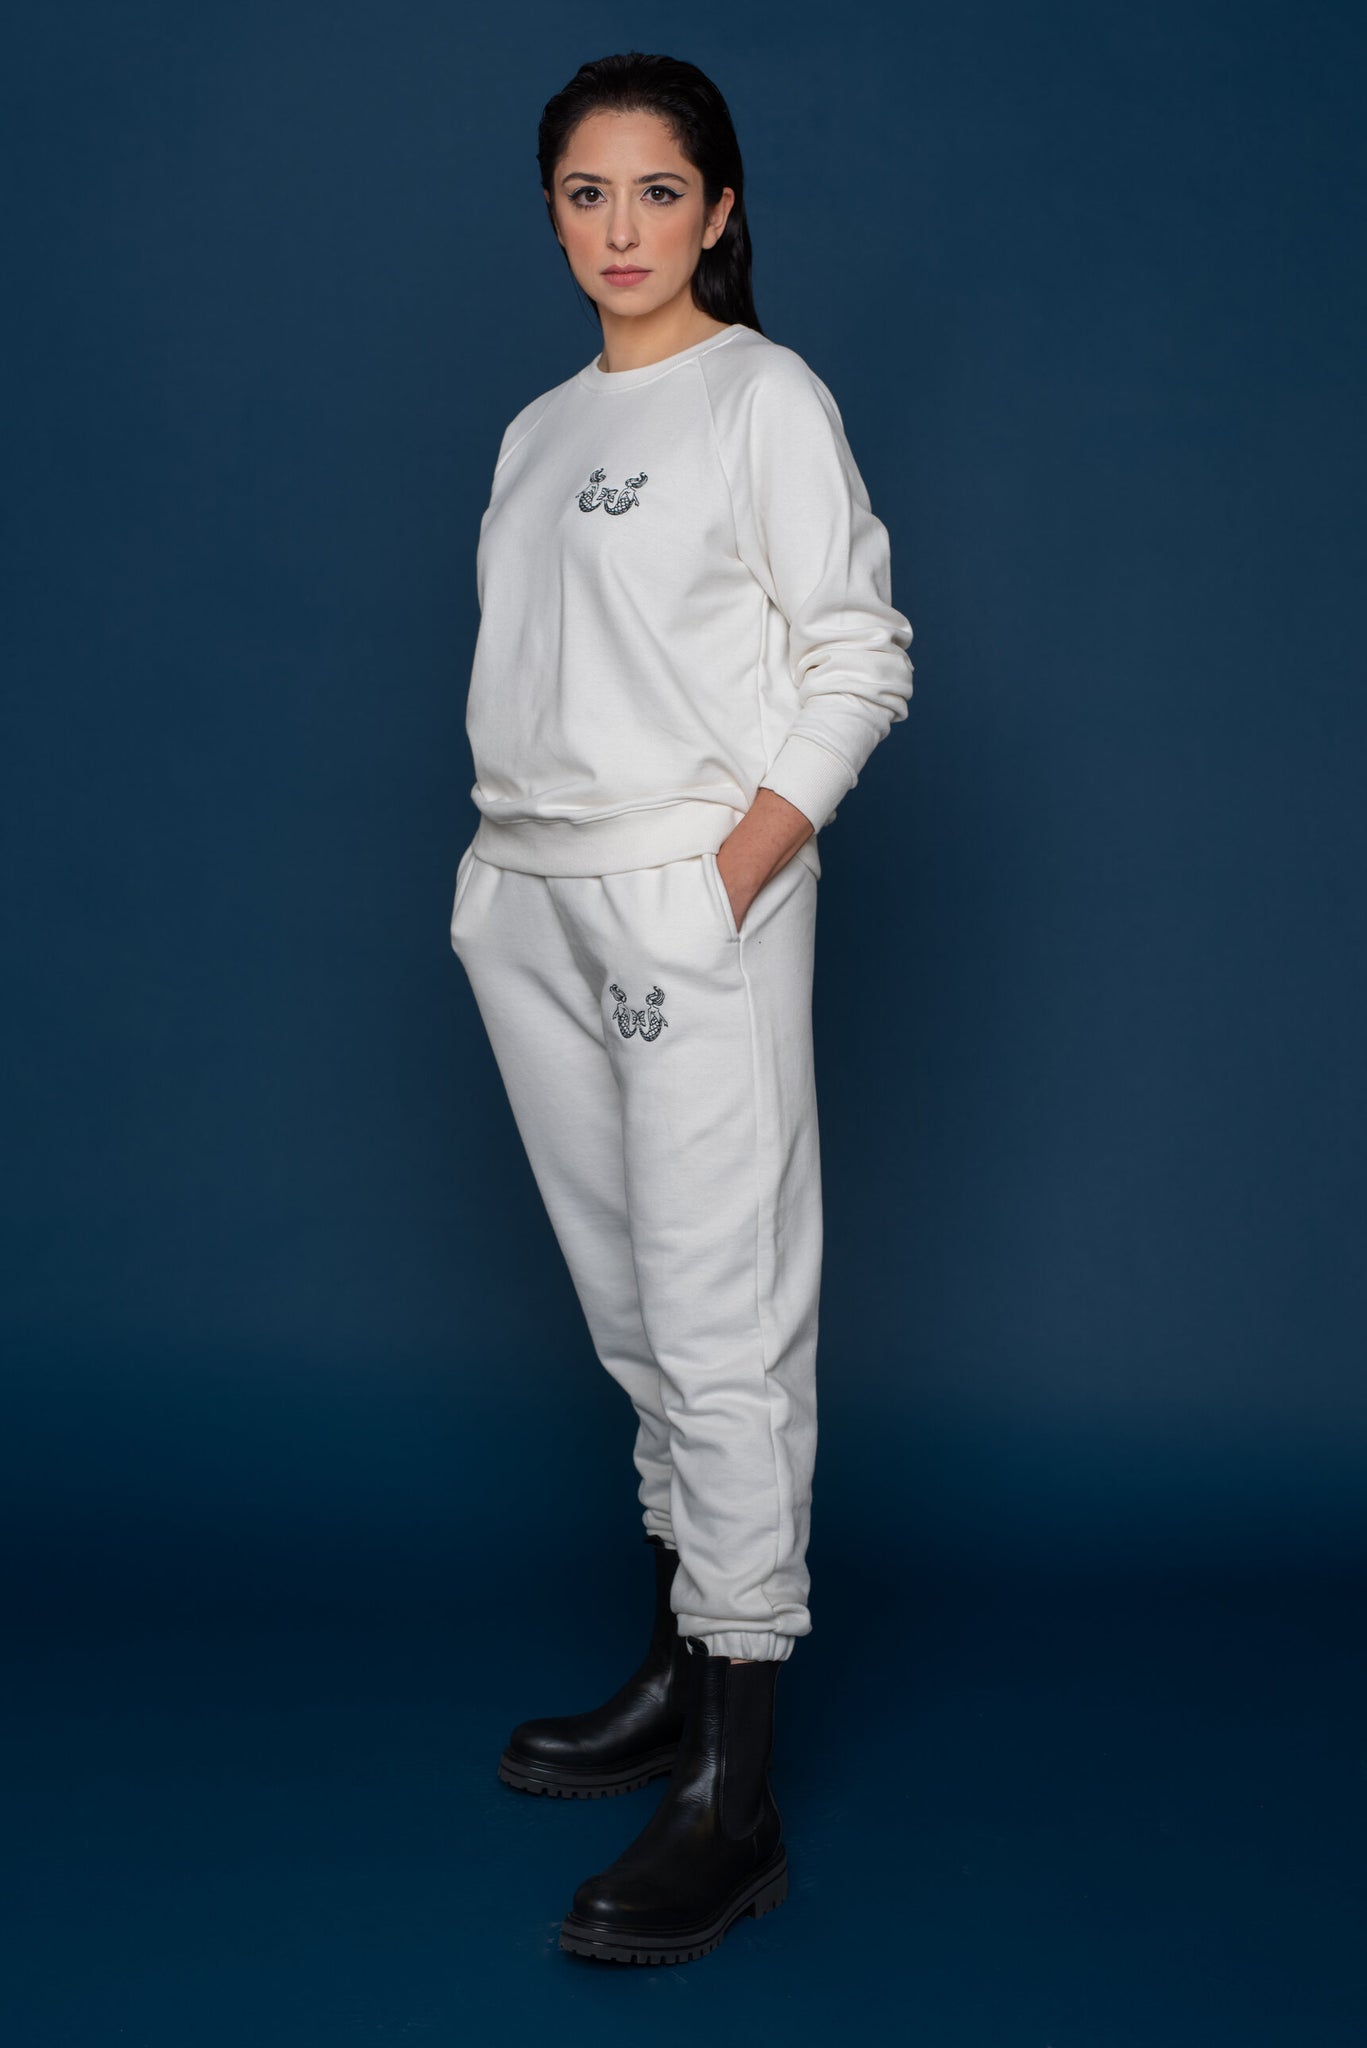 Embroidered Cotton Joggers in Off-white